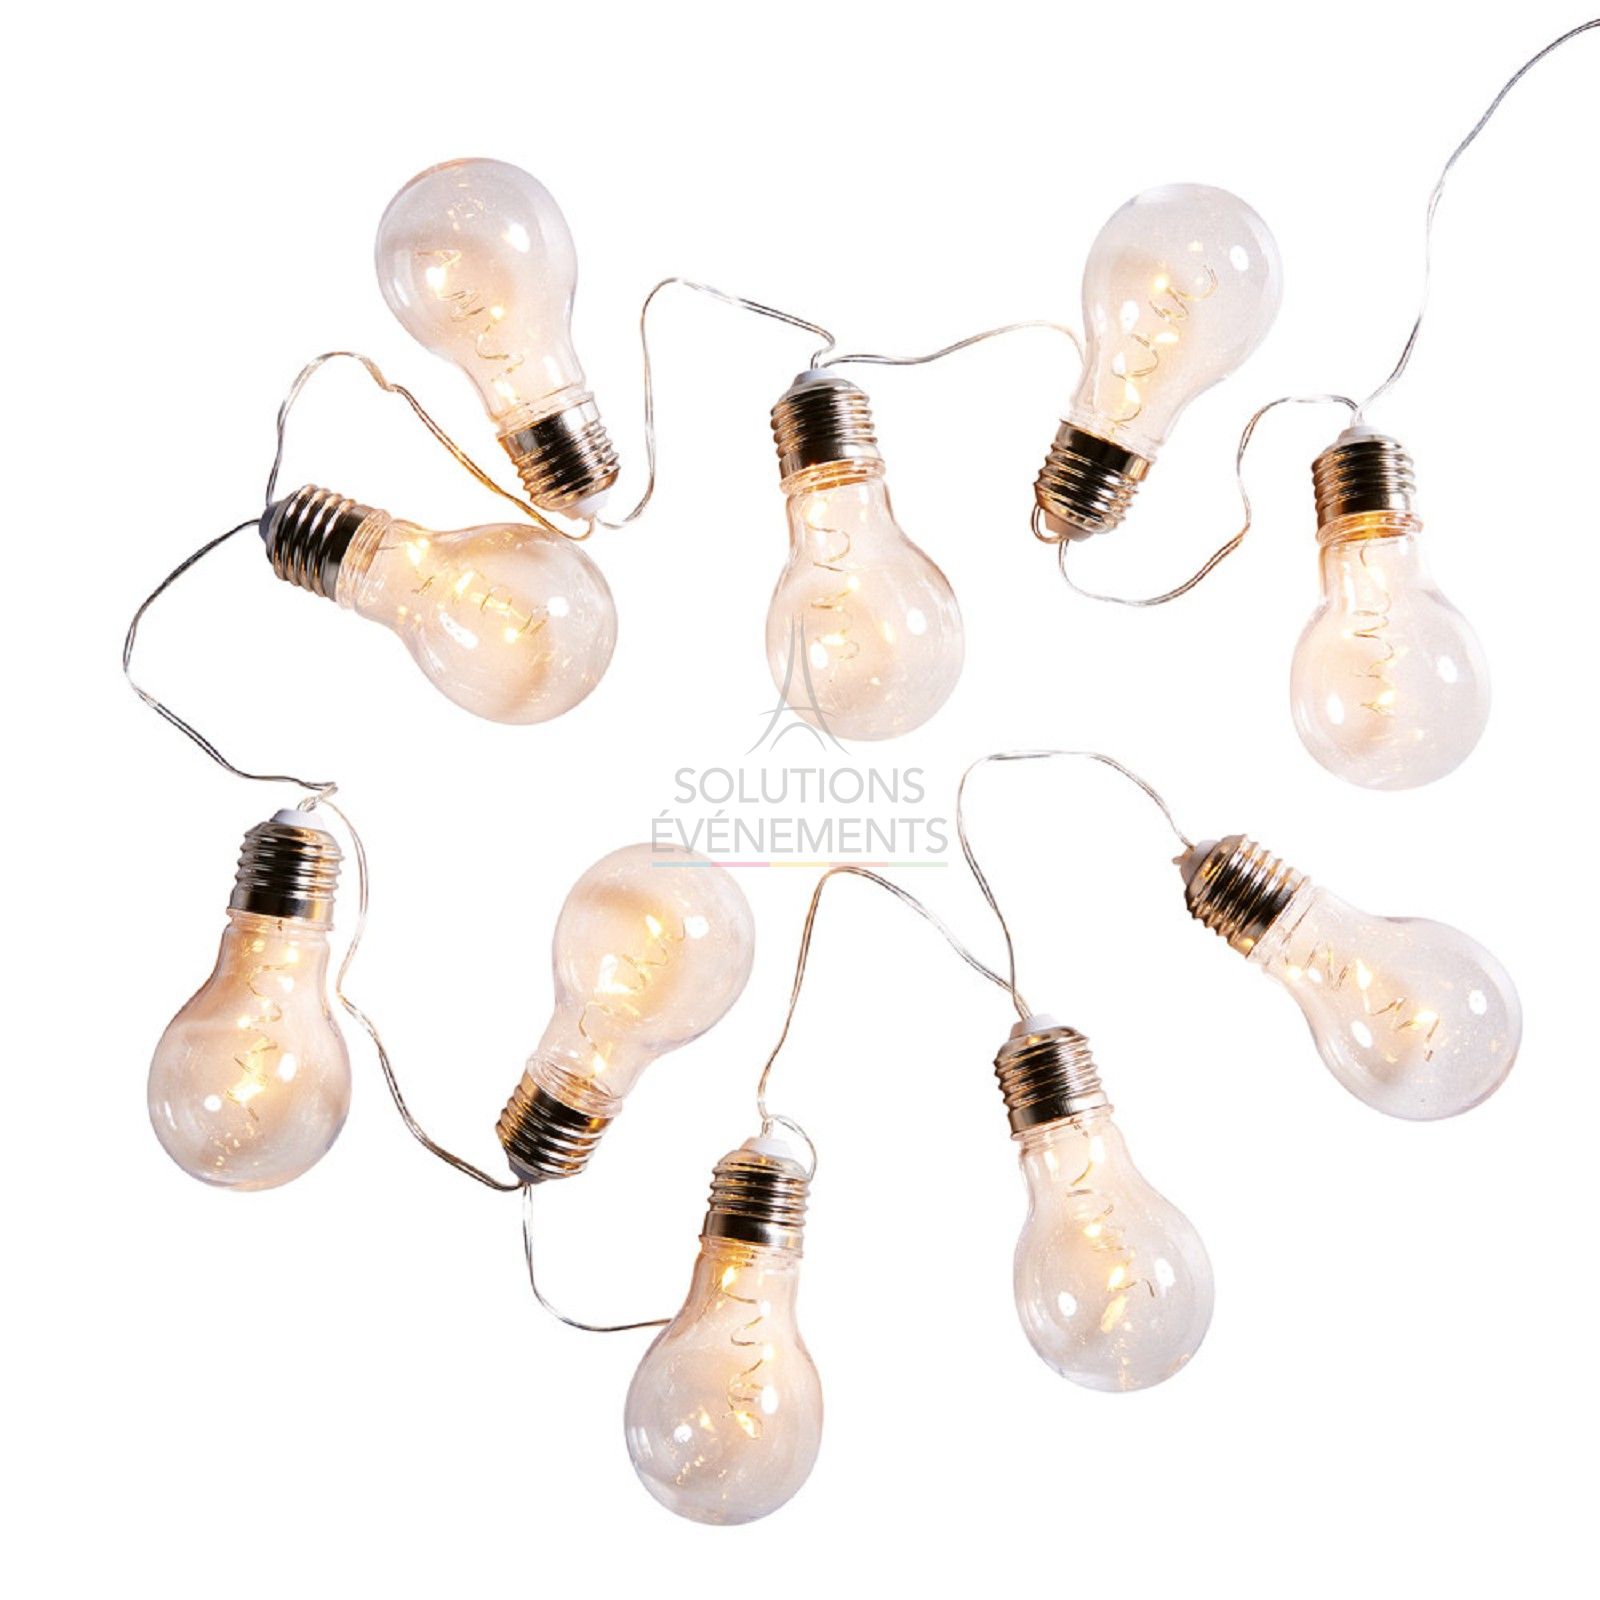 Rental of guinguette light garland with raw bulbs